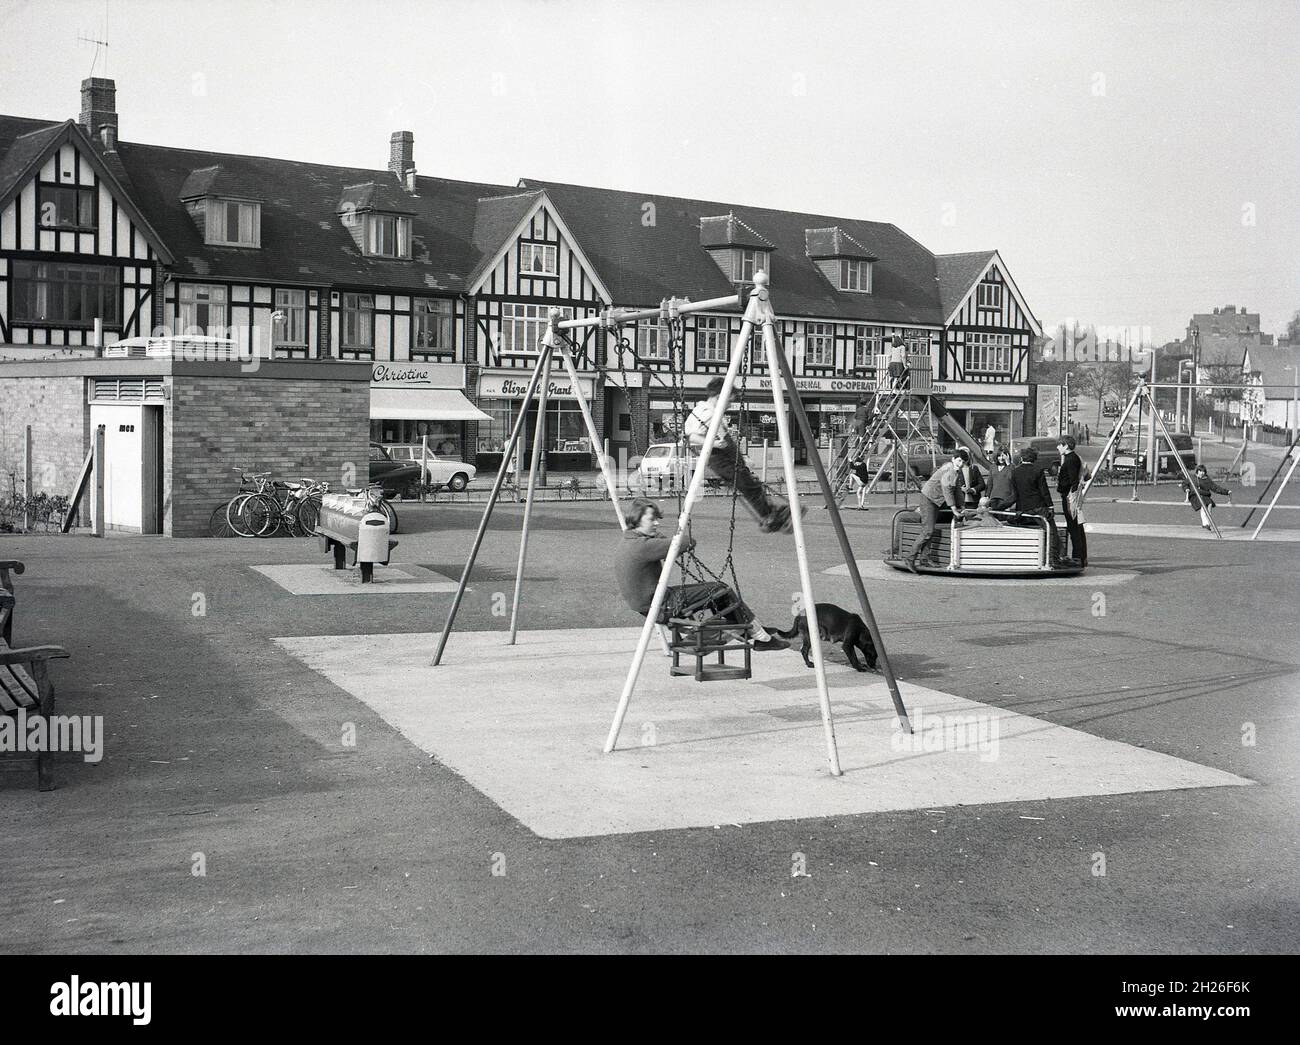 1960s, historical, a view across a childrens playground with swings and roundabout and traditional rocking horse located beside a suburban mock-tudor parade of shops, South London, England, UK, possibly Abbey Wood or Eltham. One of the shops is a Royal Arsenal Co-Operative, at this time a large consumer co-operative trading in the South East London. Stock Photo